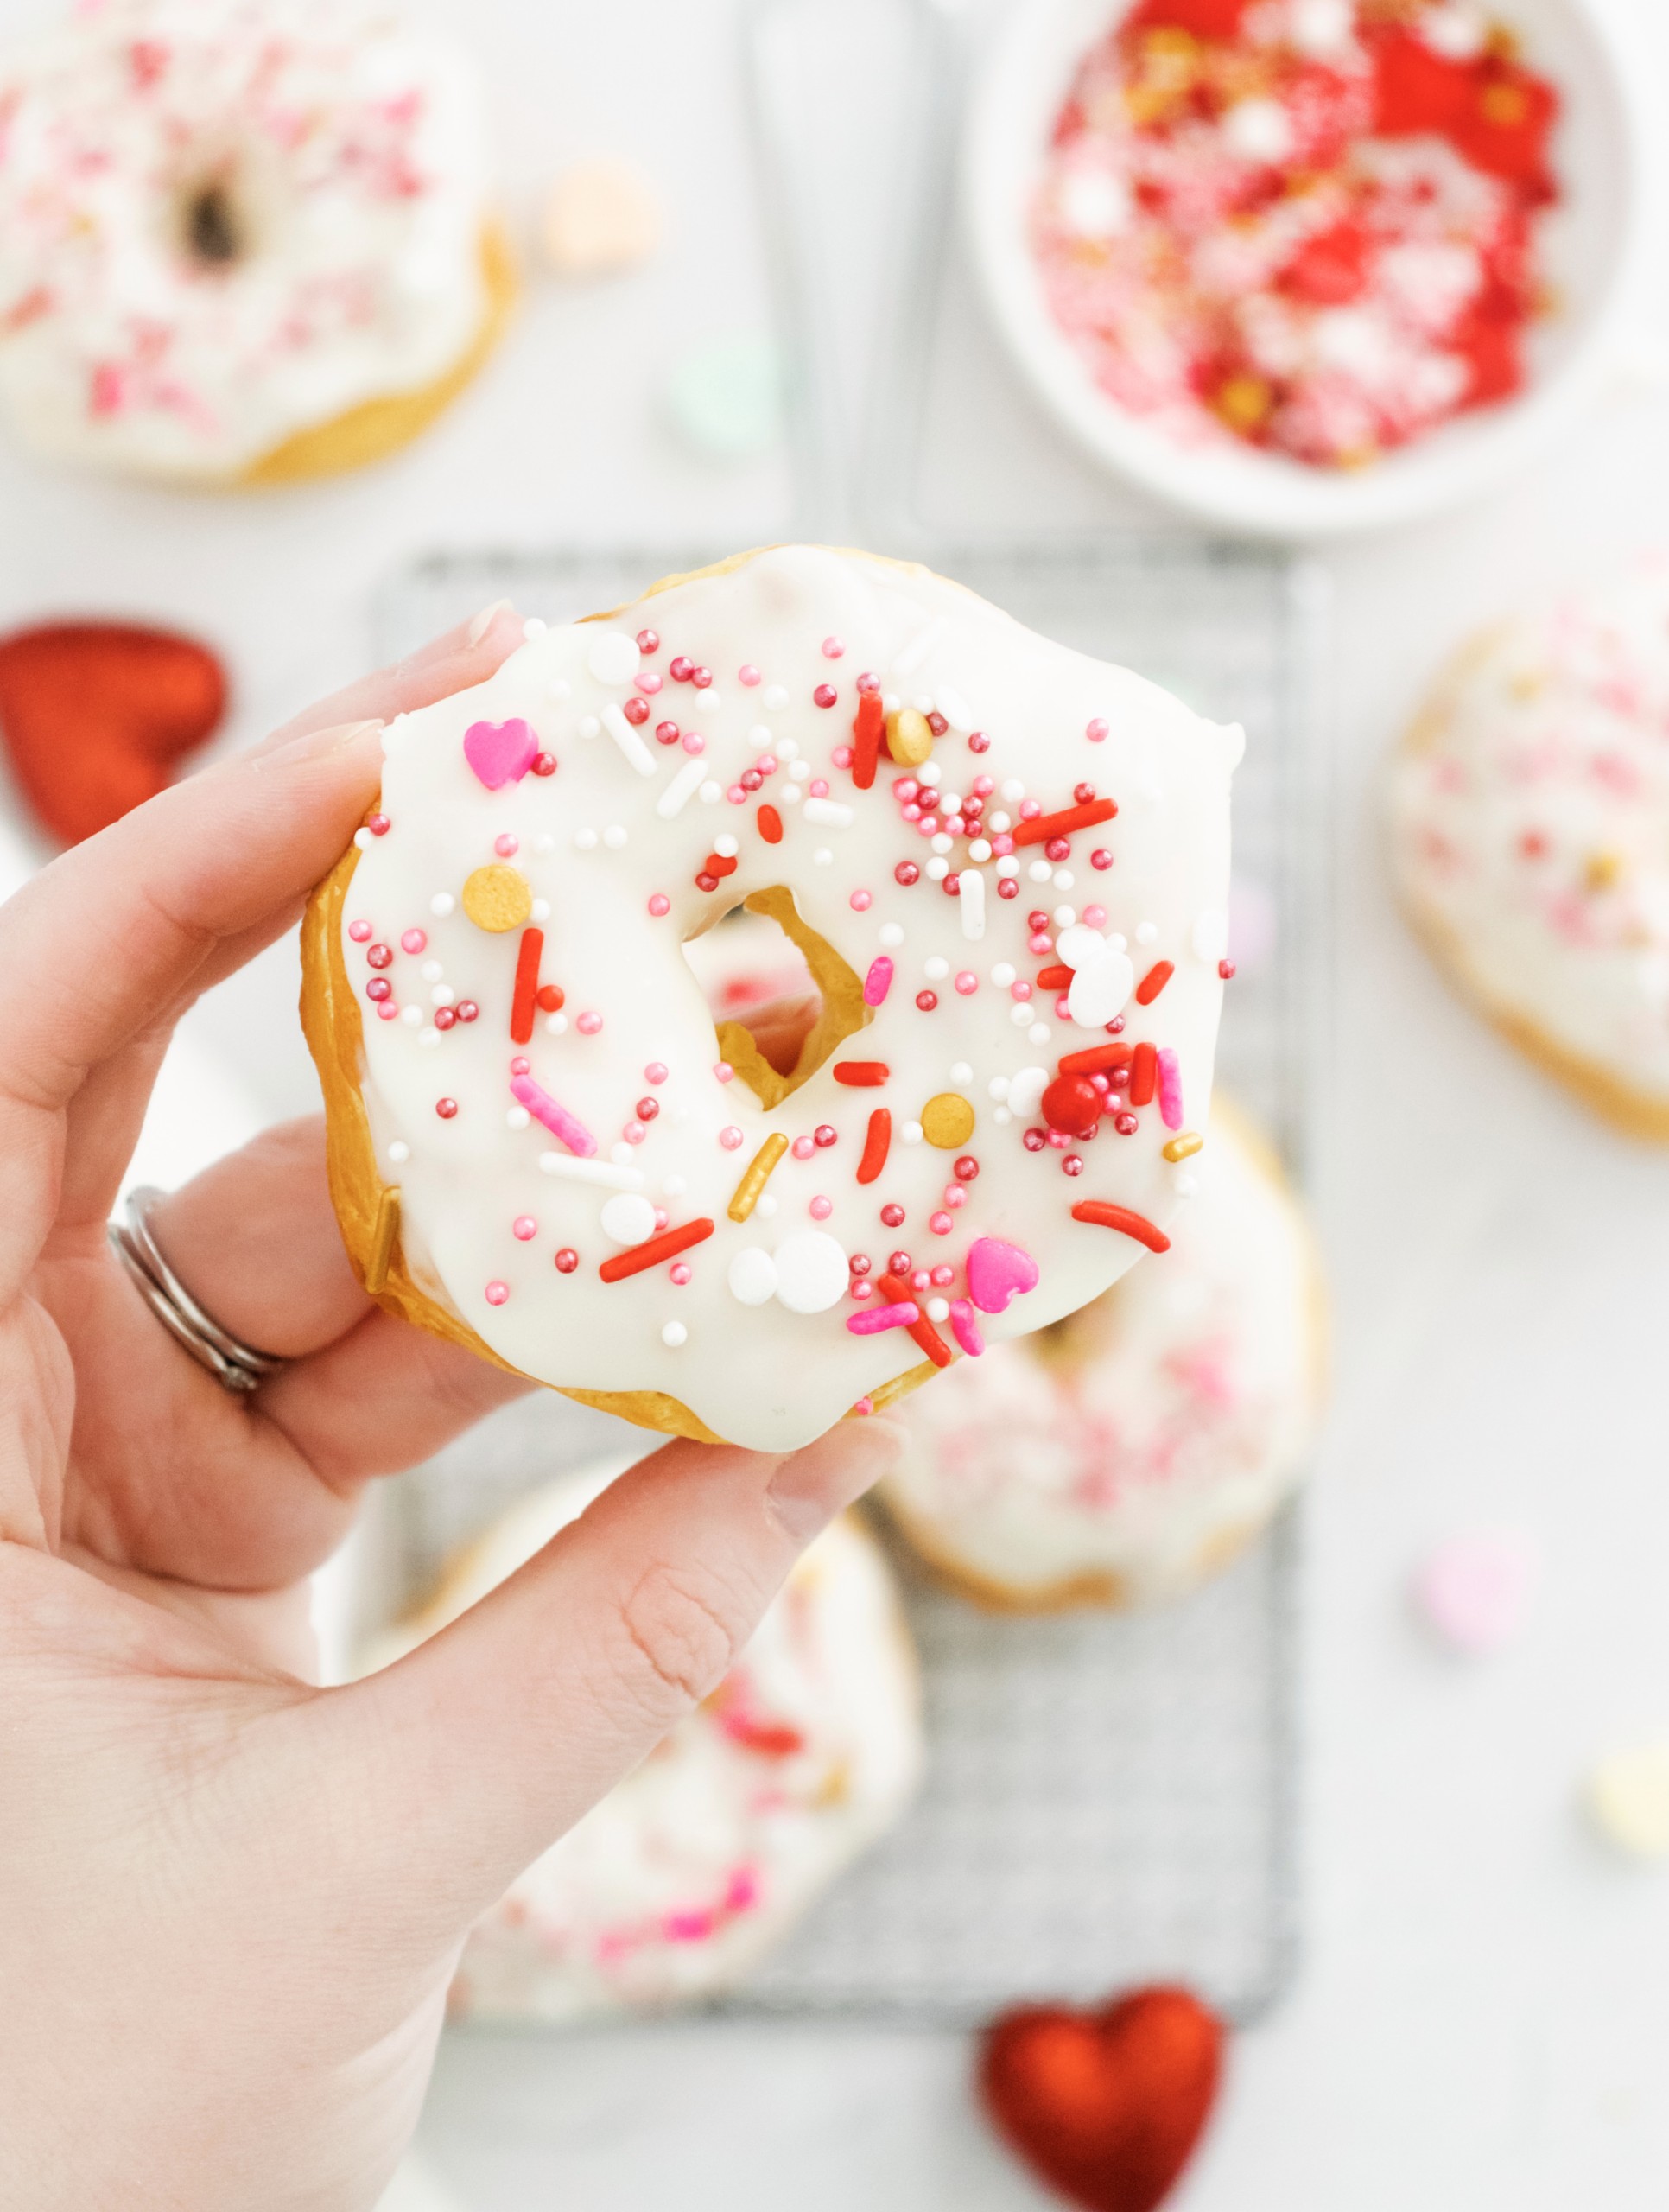 Air Fryer Donuts are easy to make and take just a few minutes to bake in your air fryer!  A fun air fryer recipe your entire family will love.